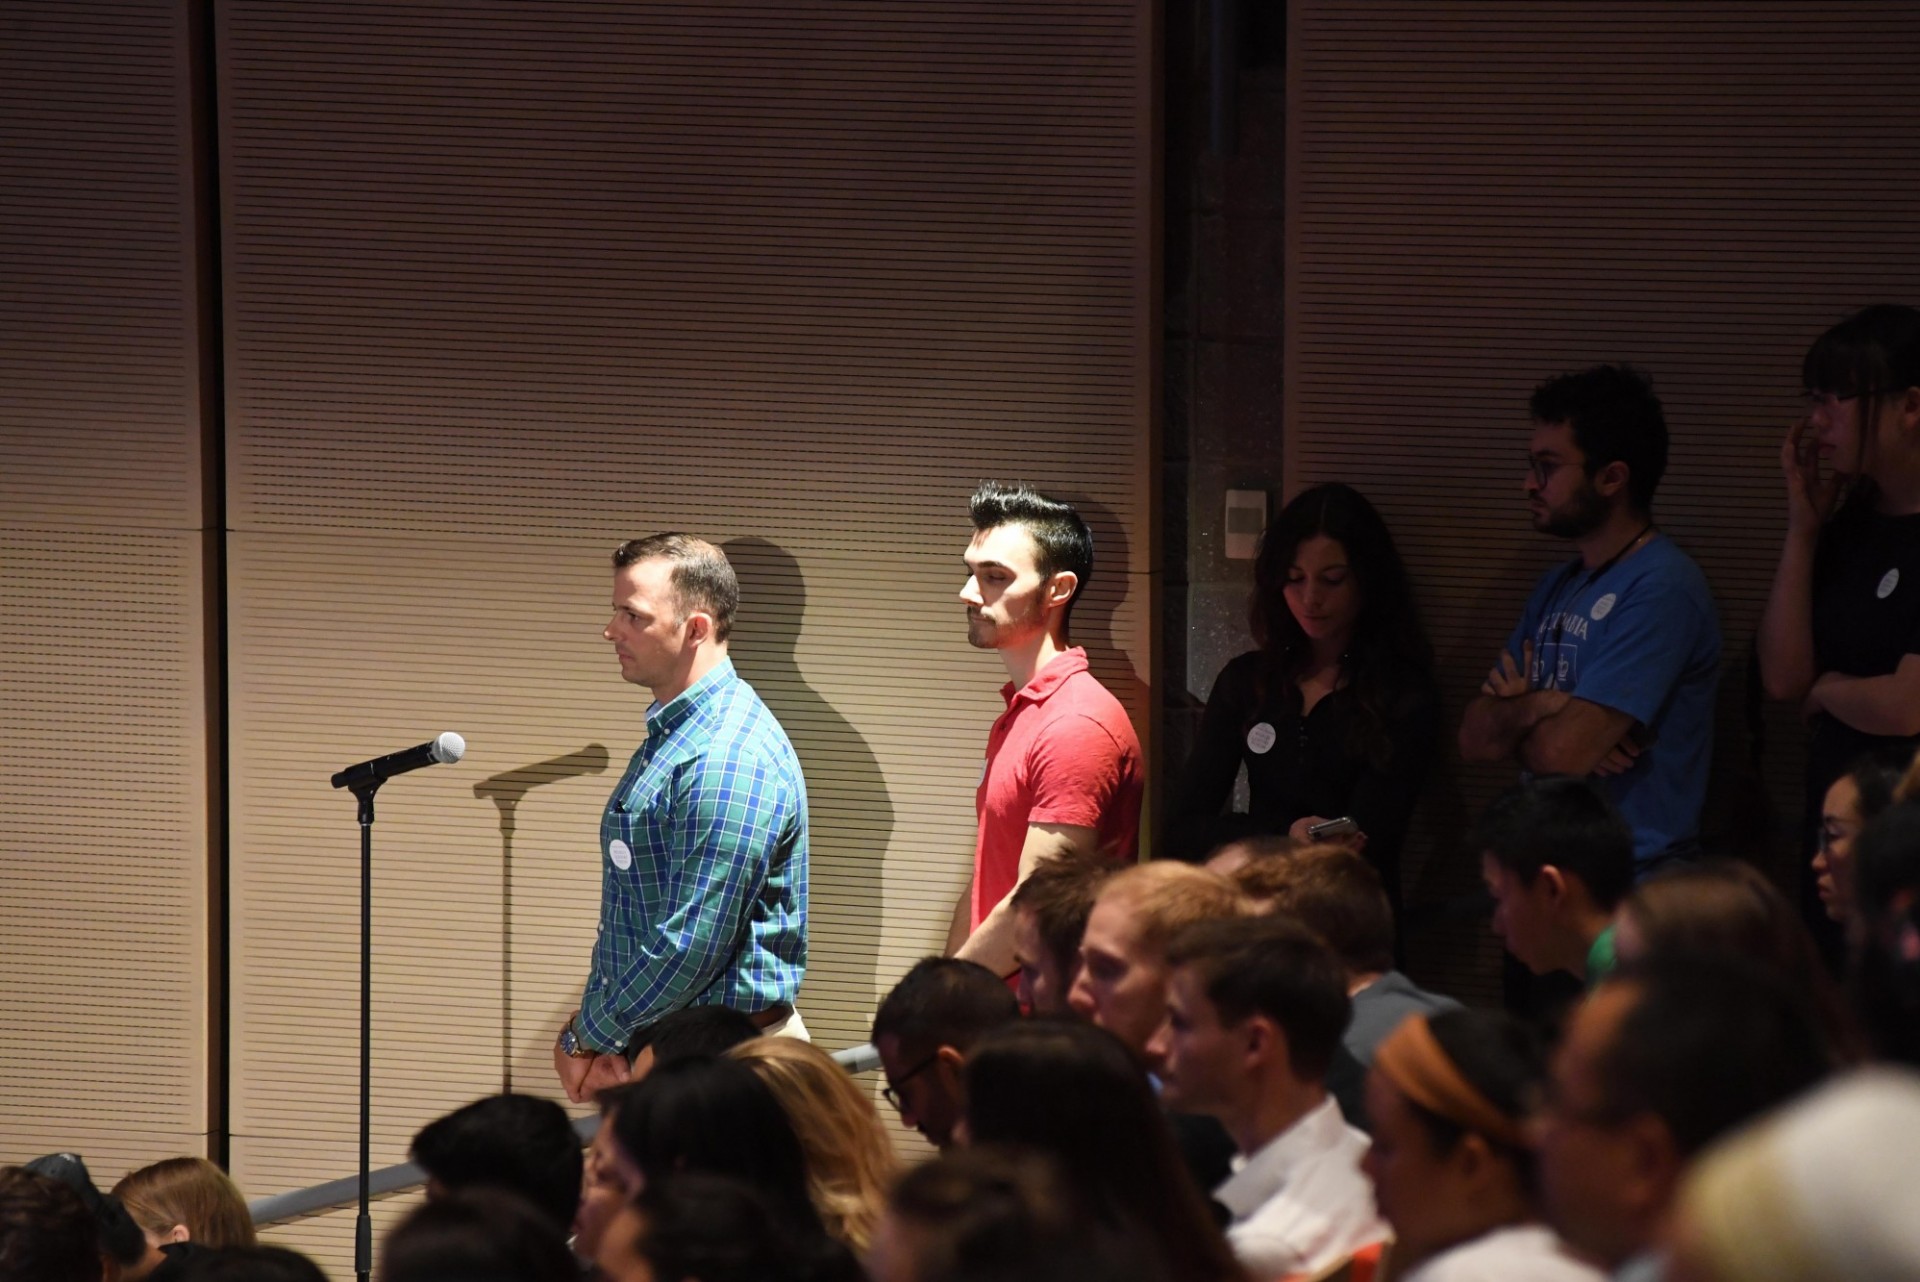 Columbia University students line up to ask President Barham Salih of Iraq a question during the question and answer session.